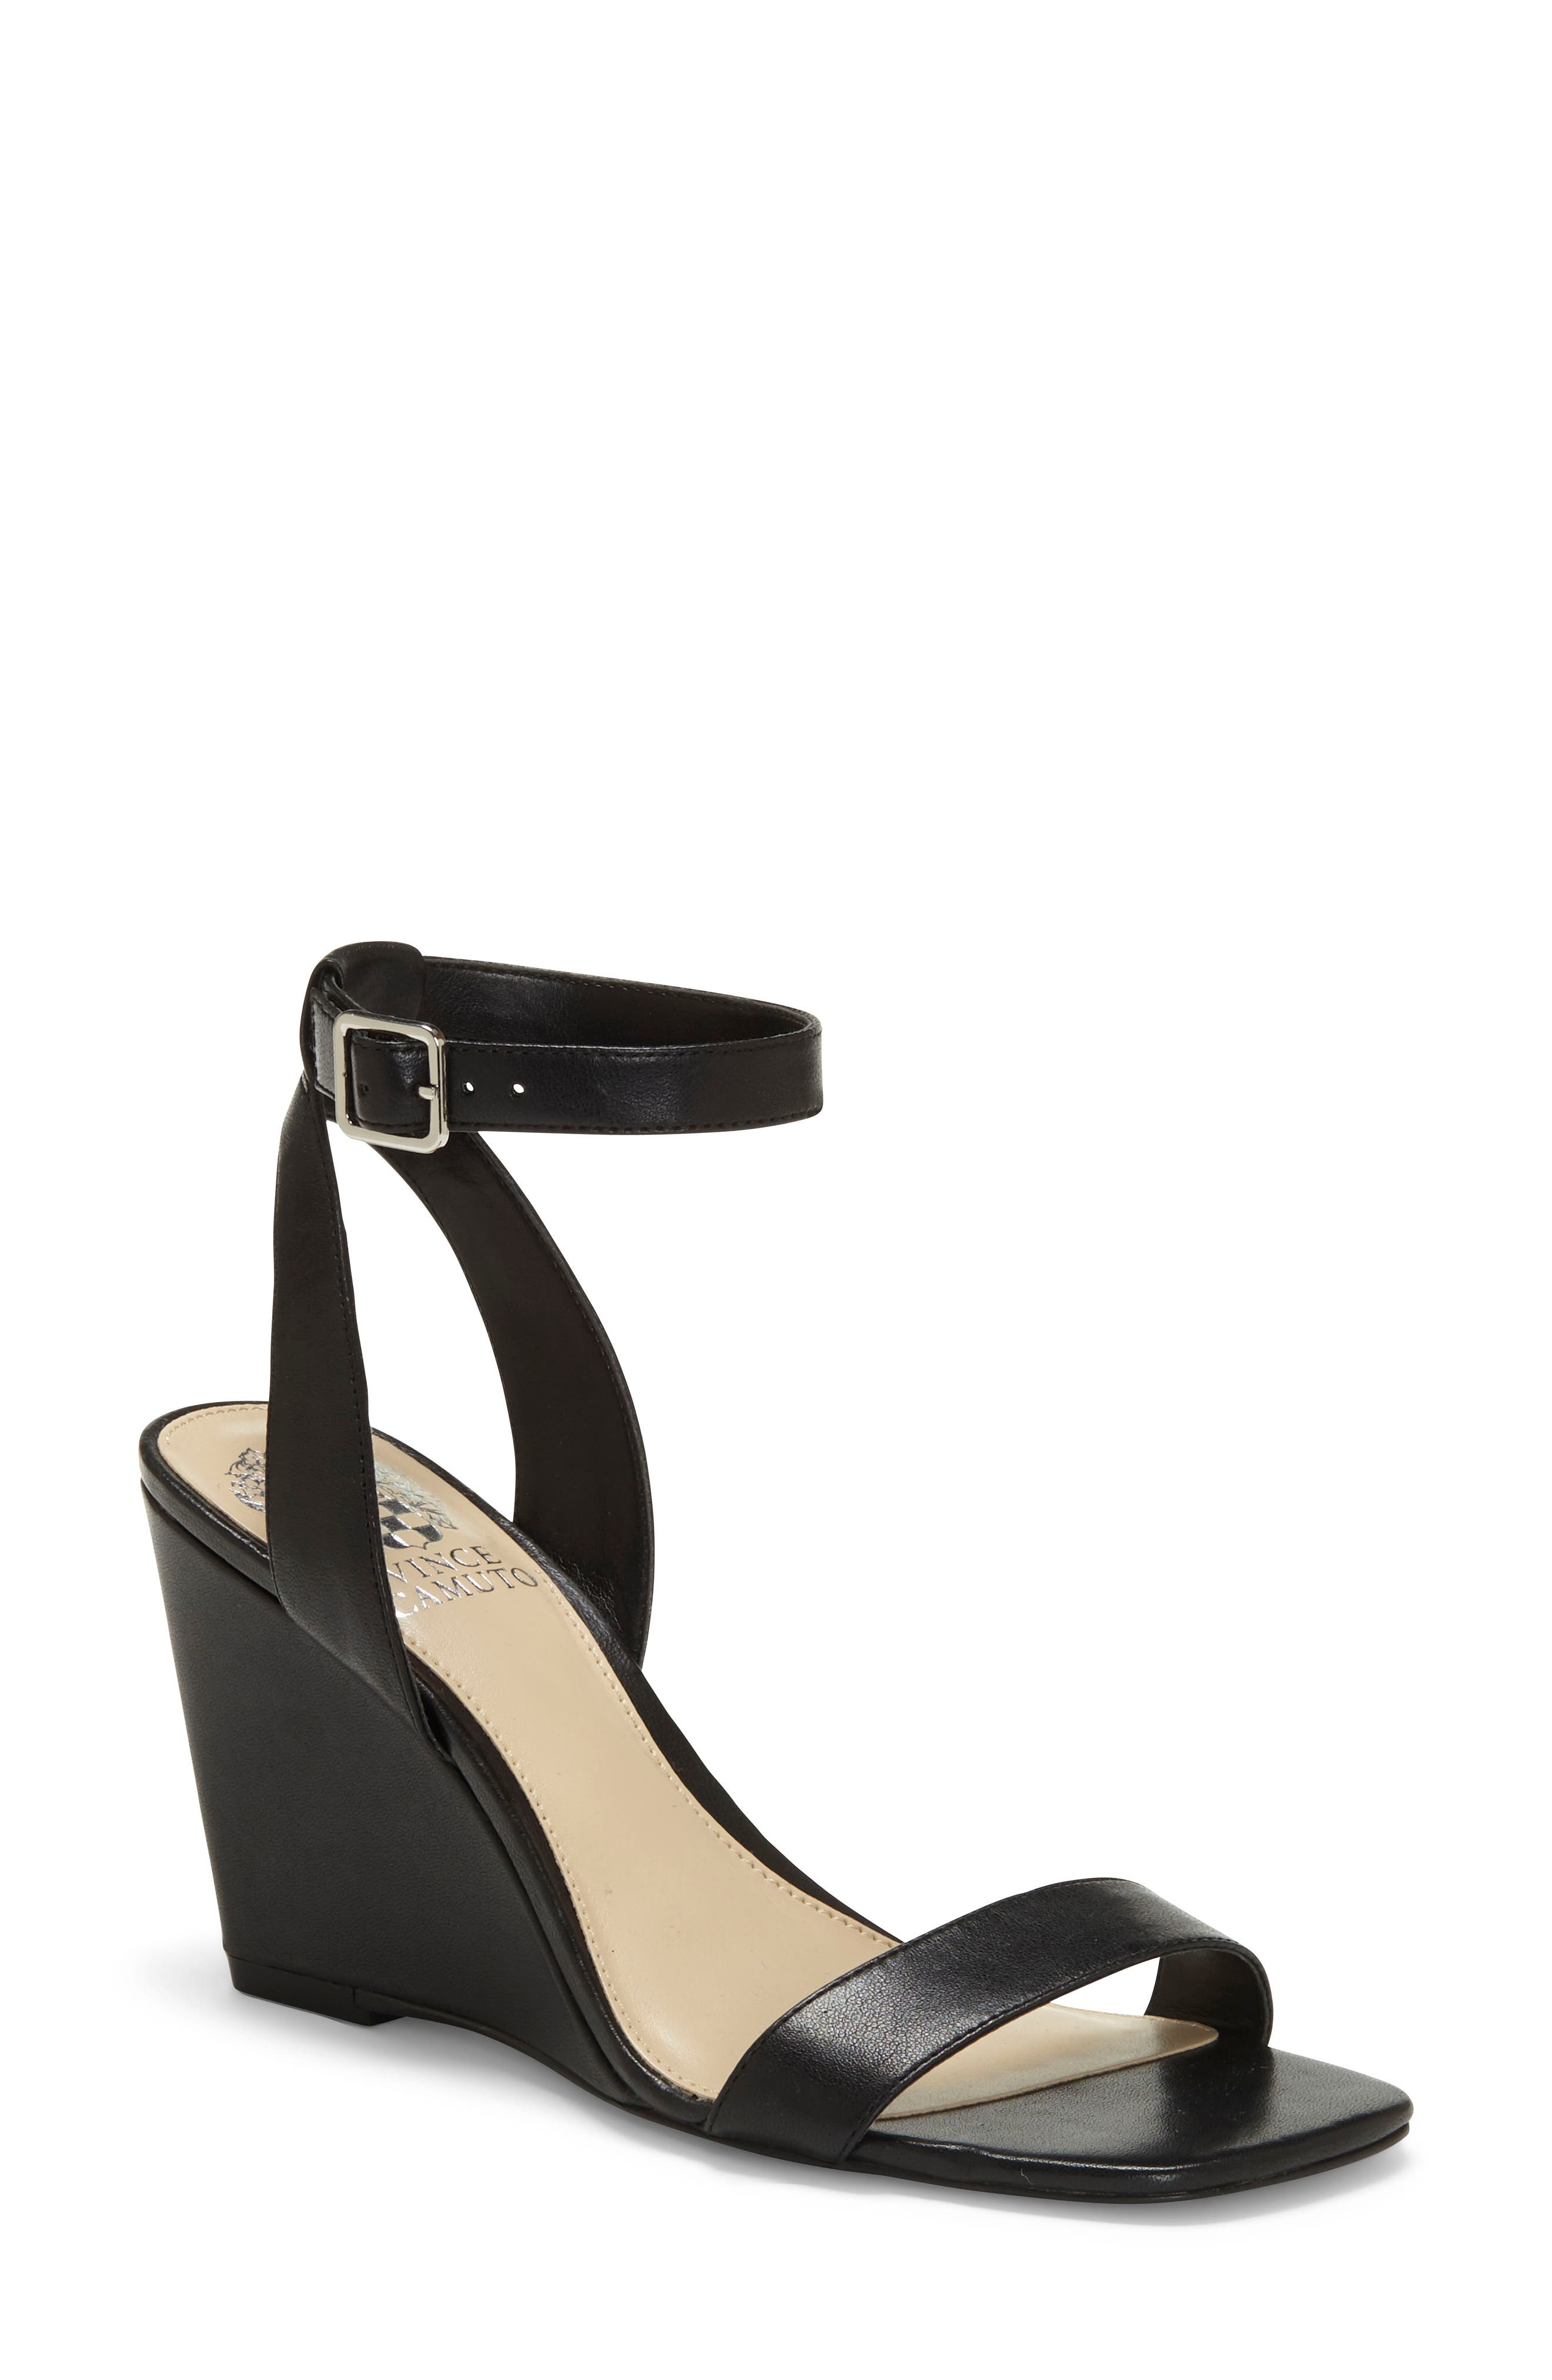 Women's Wedges Vince Camuto Shoes 